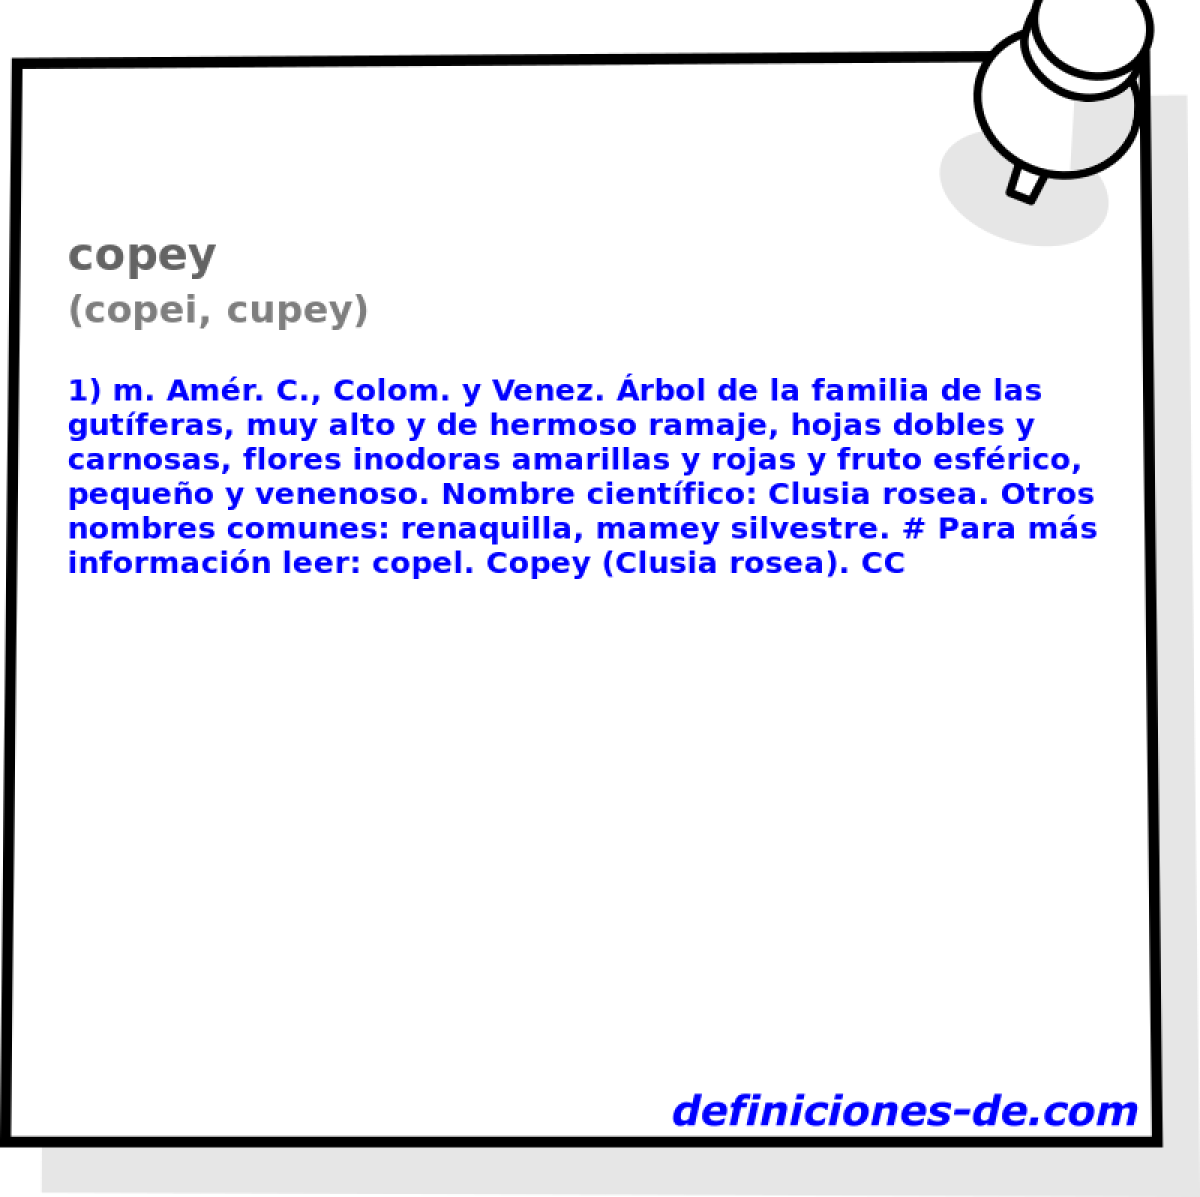 copey (copei, cupey)